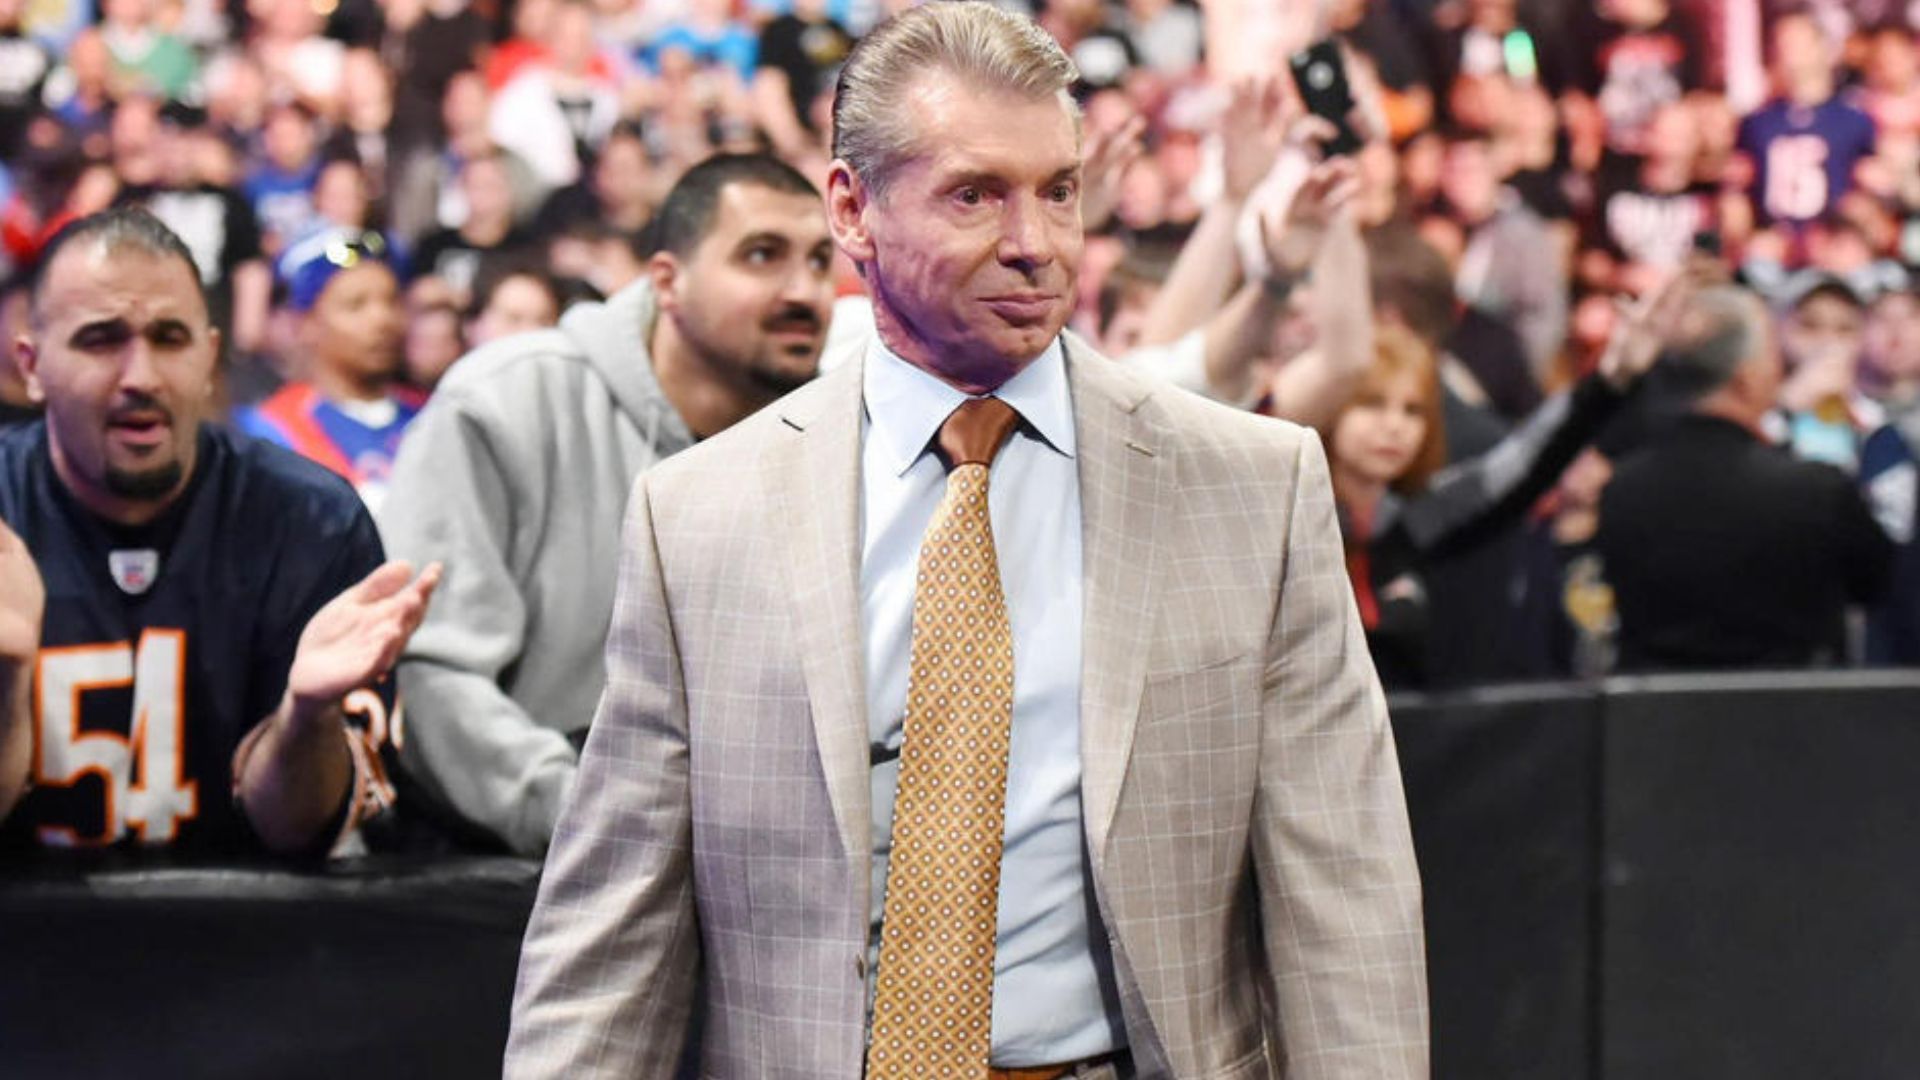 Vince McMahon recently resigned from all his WWE/TKO roles.